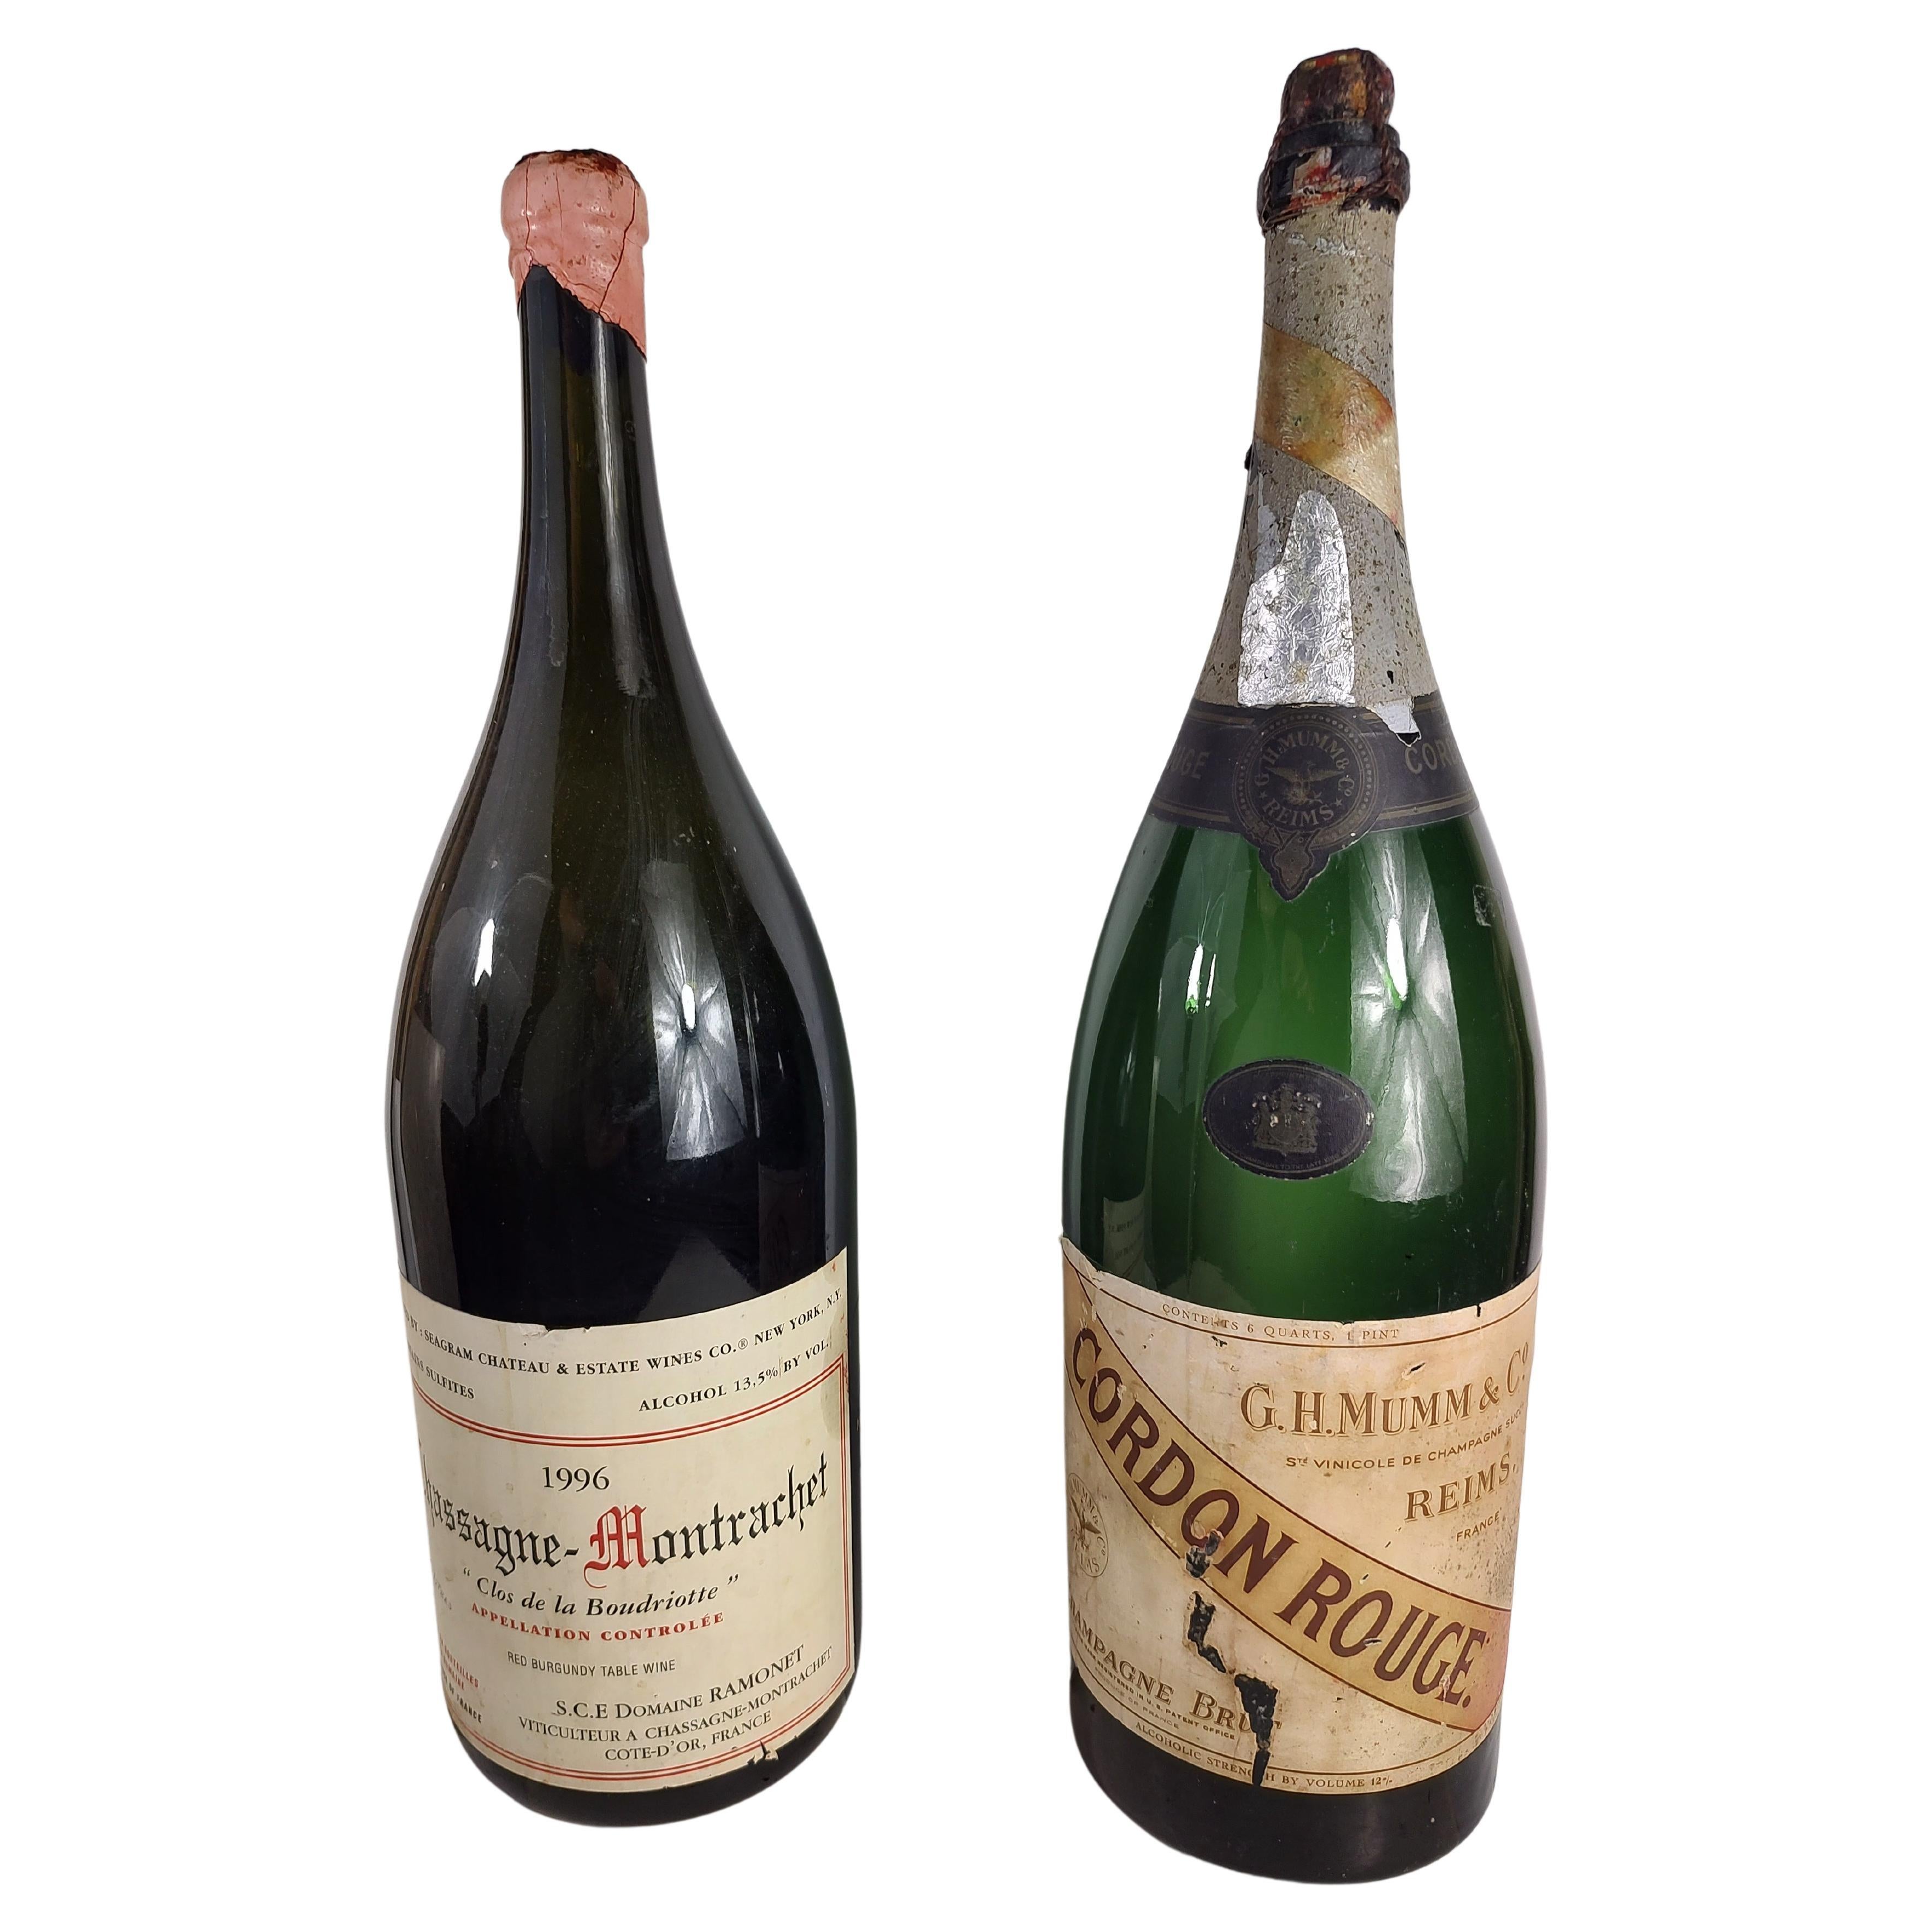 Fabulous blown glass display bottles which usually sat in a store window or a display inside. Chassagne-Montrachet & Cordon Rouge. Heavy glass, sealed with no liquid. In very good vintage condition with minimal wear. See pics. Can be parcel posted.